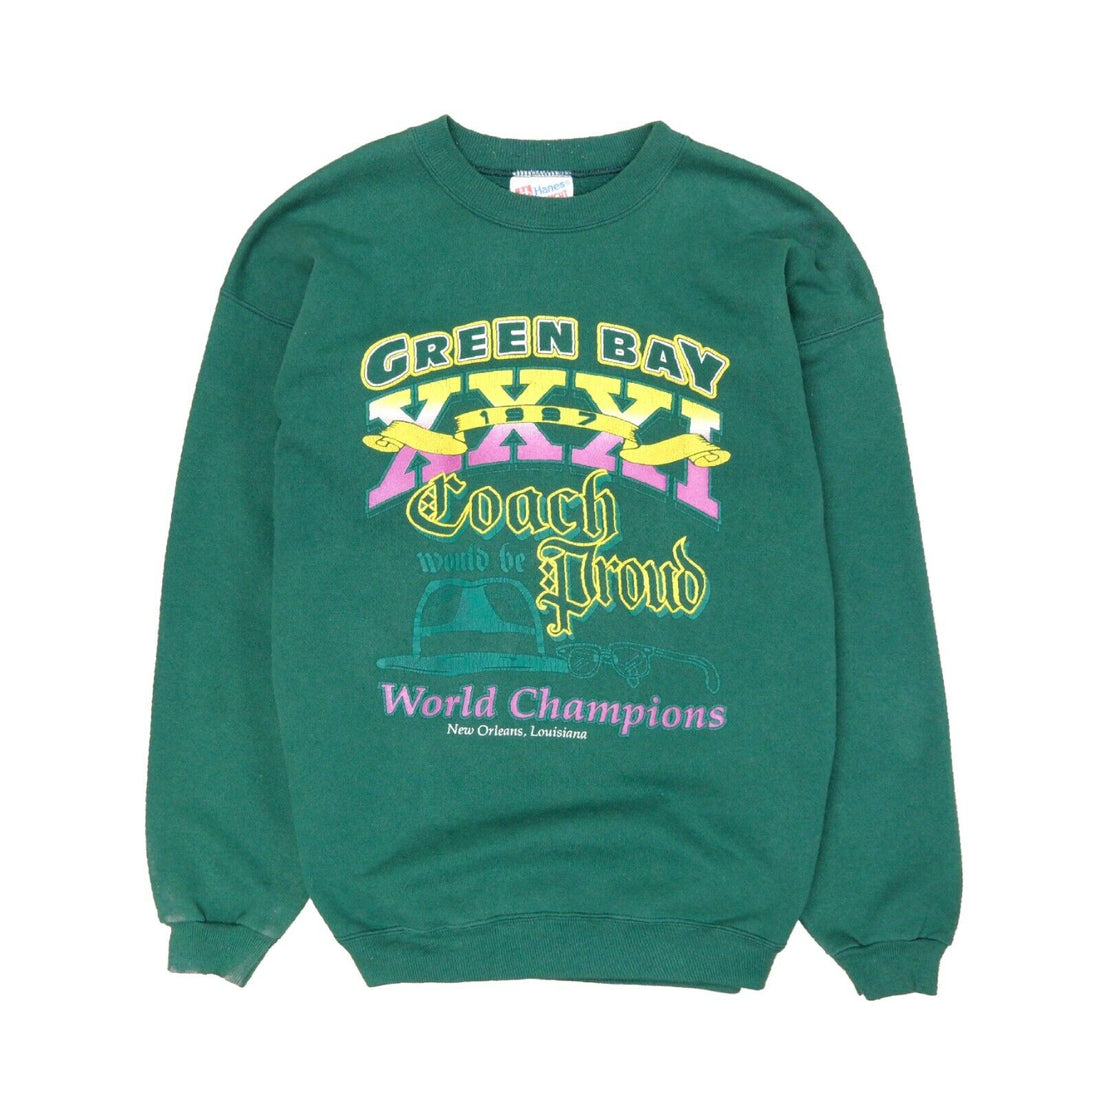 Vintage Green Bay Packers Super Bowl XXXI Champs Sweatshirt Size Large 1997 NFL